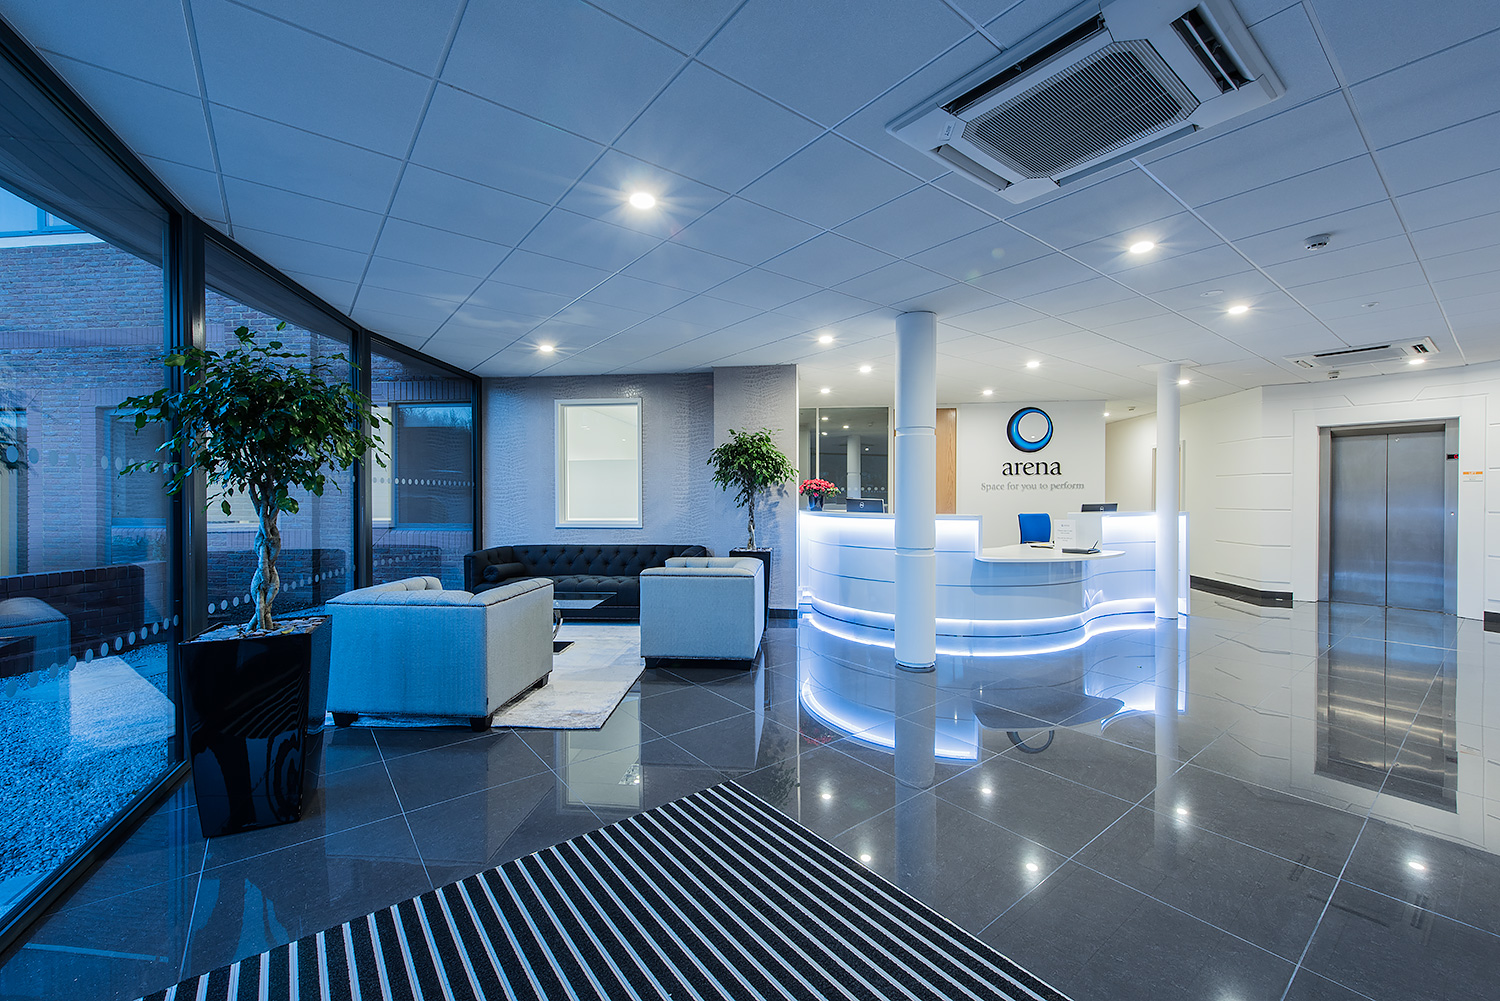 interior-photography-commercial-dorset-hampshire-arena-business-centres-7.jpg